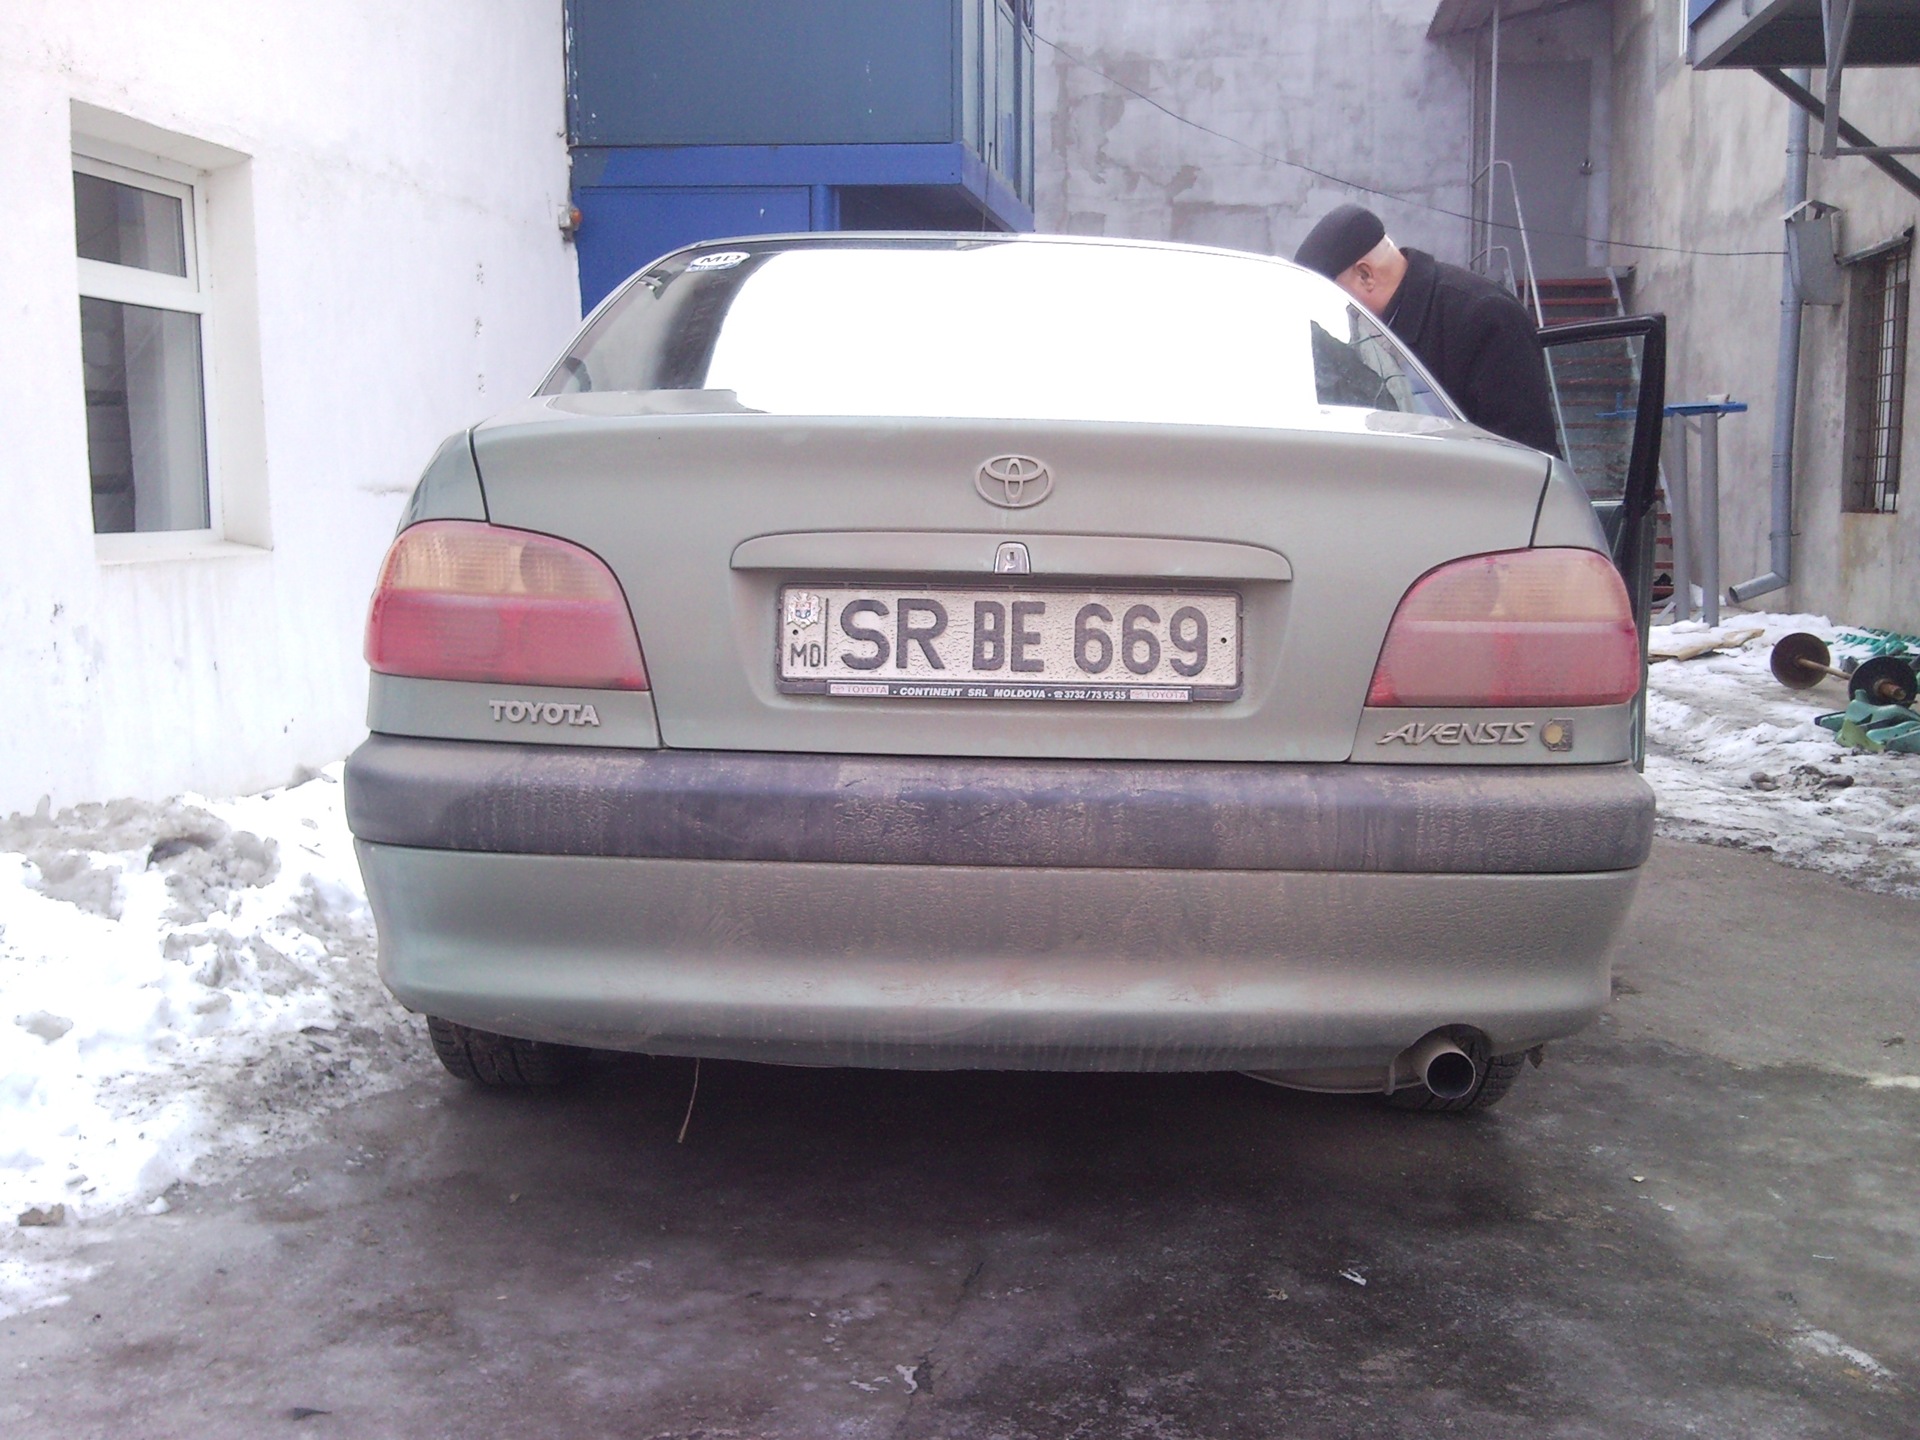 She was like this before the re-registration and styling - Toyota Avensis 18 liter 2002